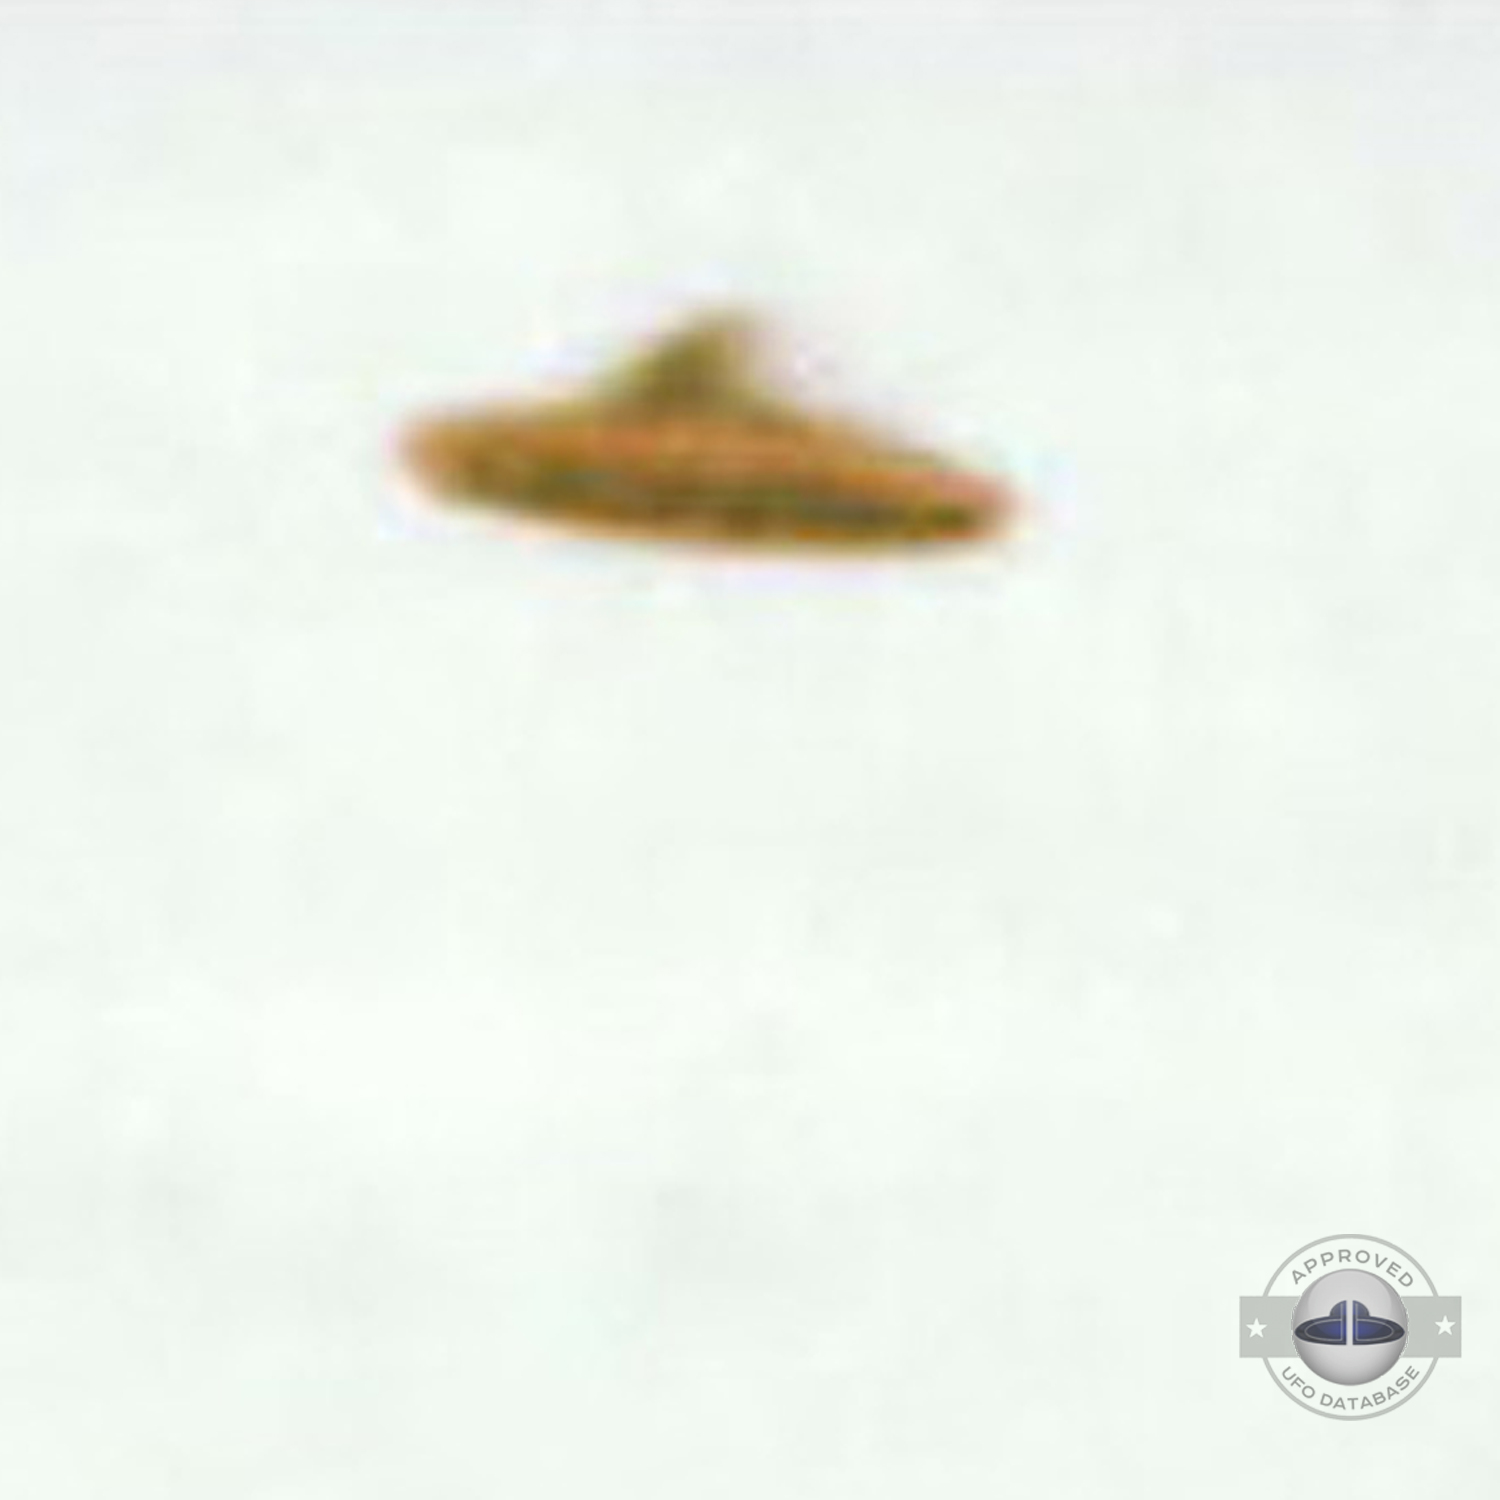 ufo picture was taken from a car ufo was few hundreds meters away UFO Picture #62-4